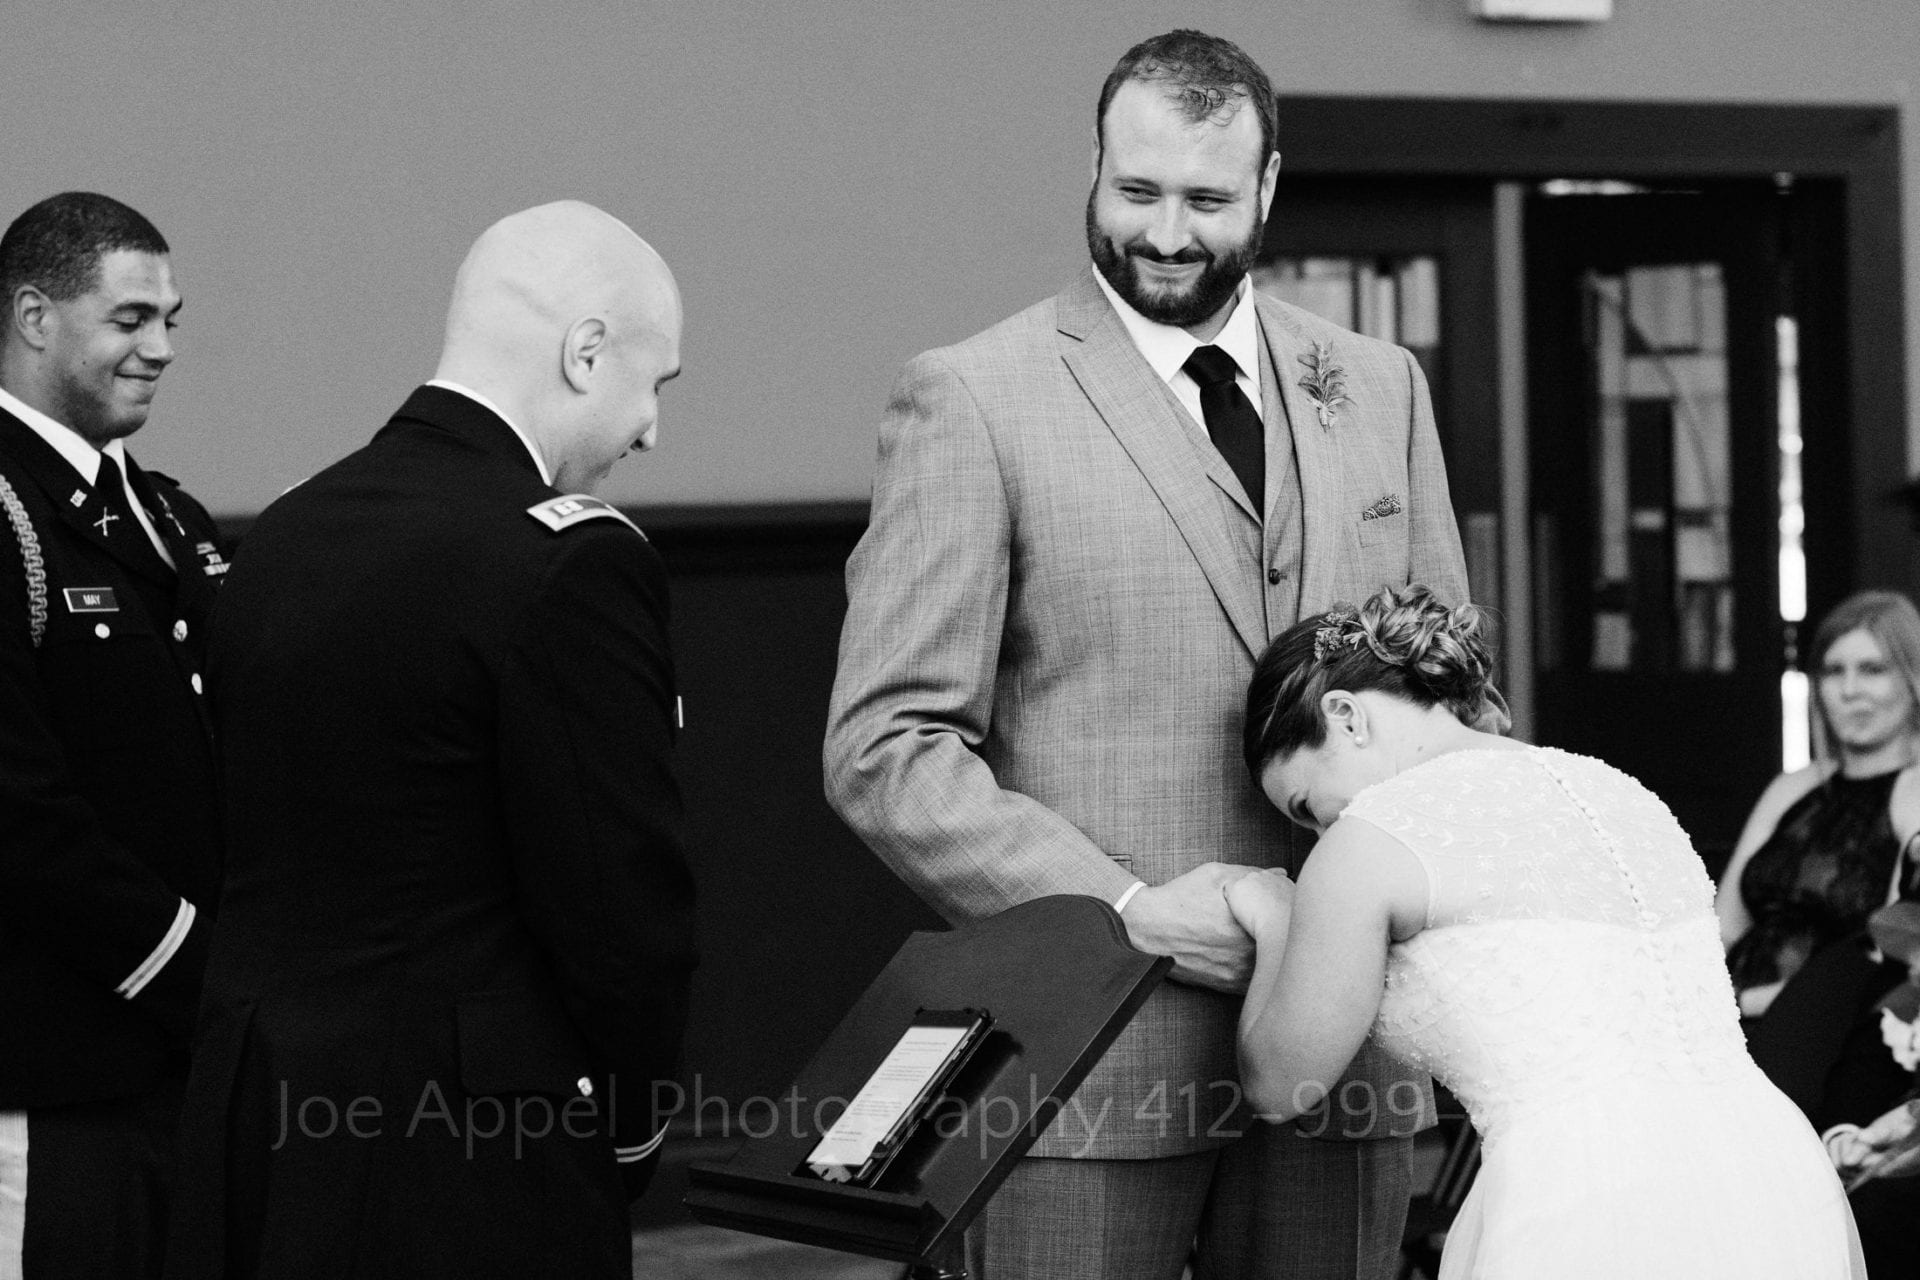 A groom looks over at the officiant and smiles as his bride bows her head in laughter.